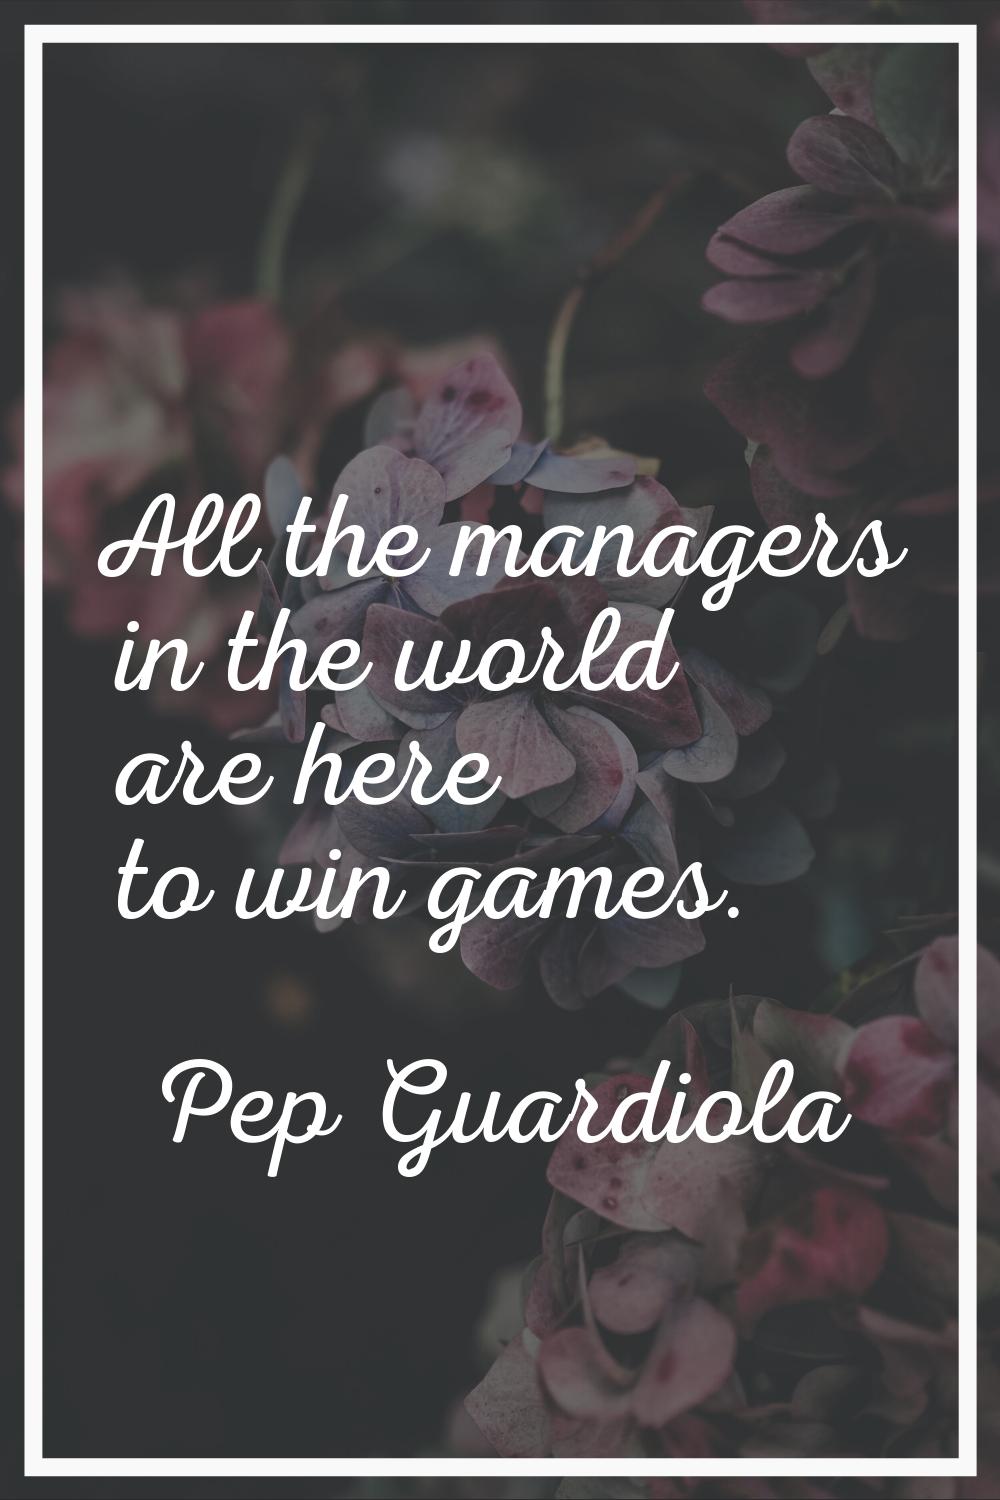 All the managers in the world are here to win games.